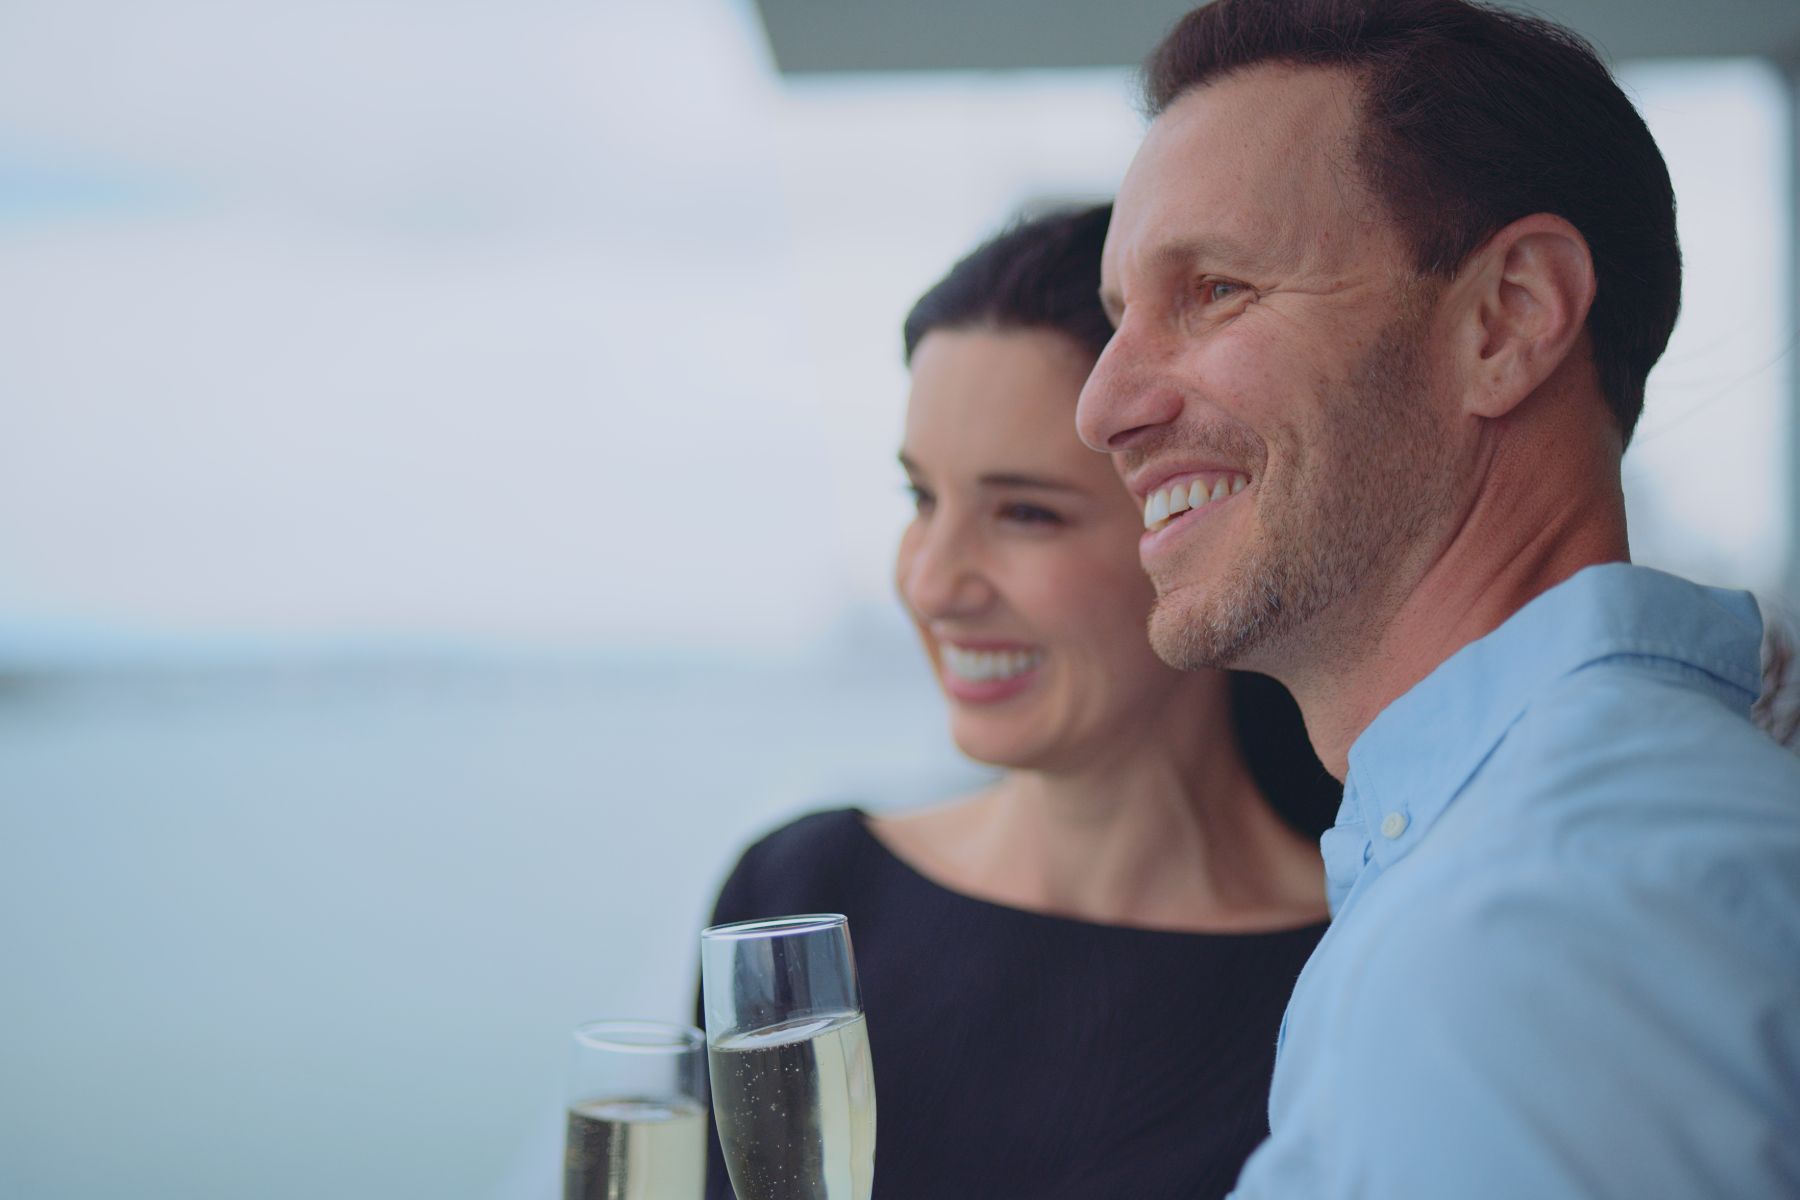 Macken Koya Bay Side profile of man and woman smiling looking out over the water holding drinks